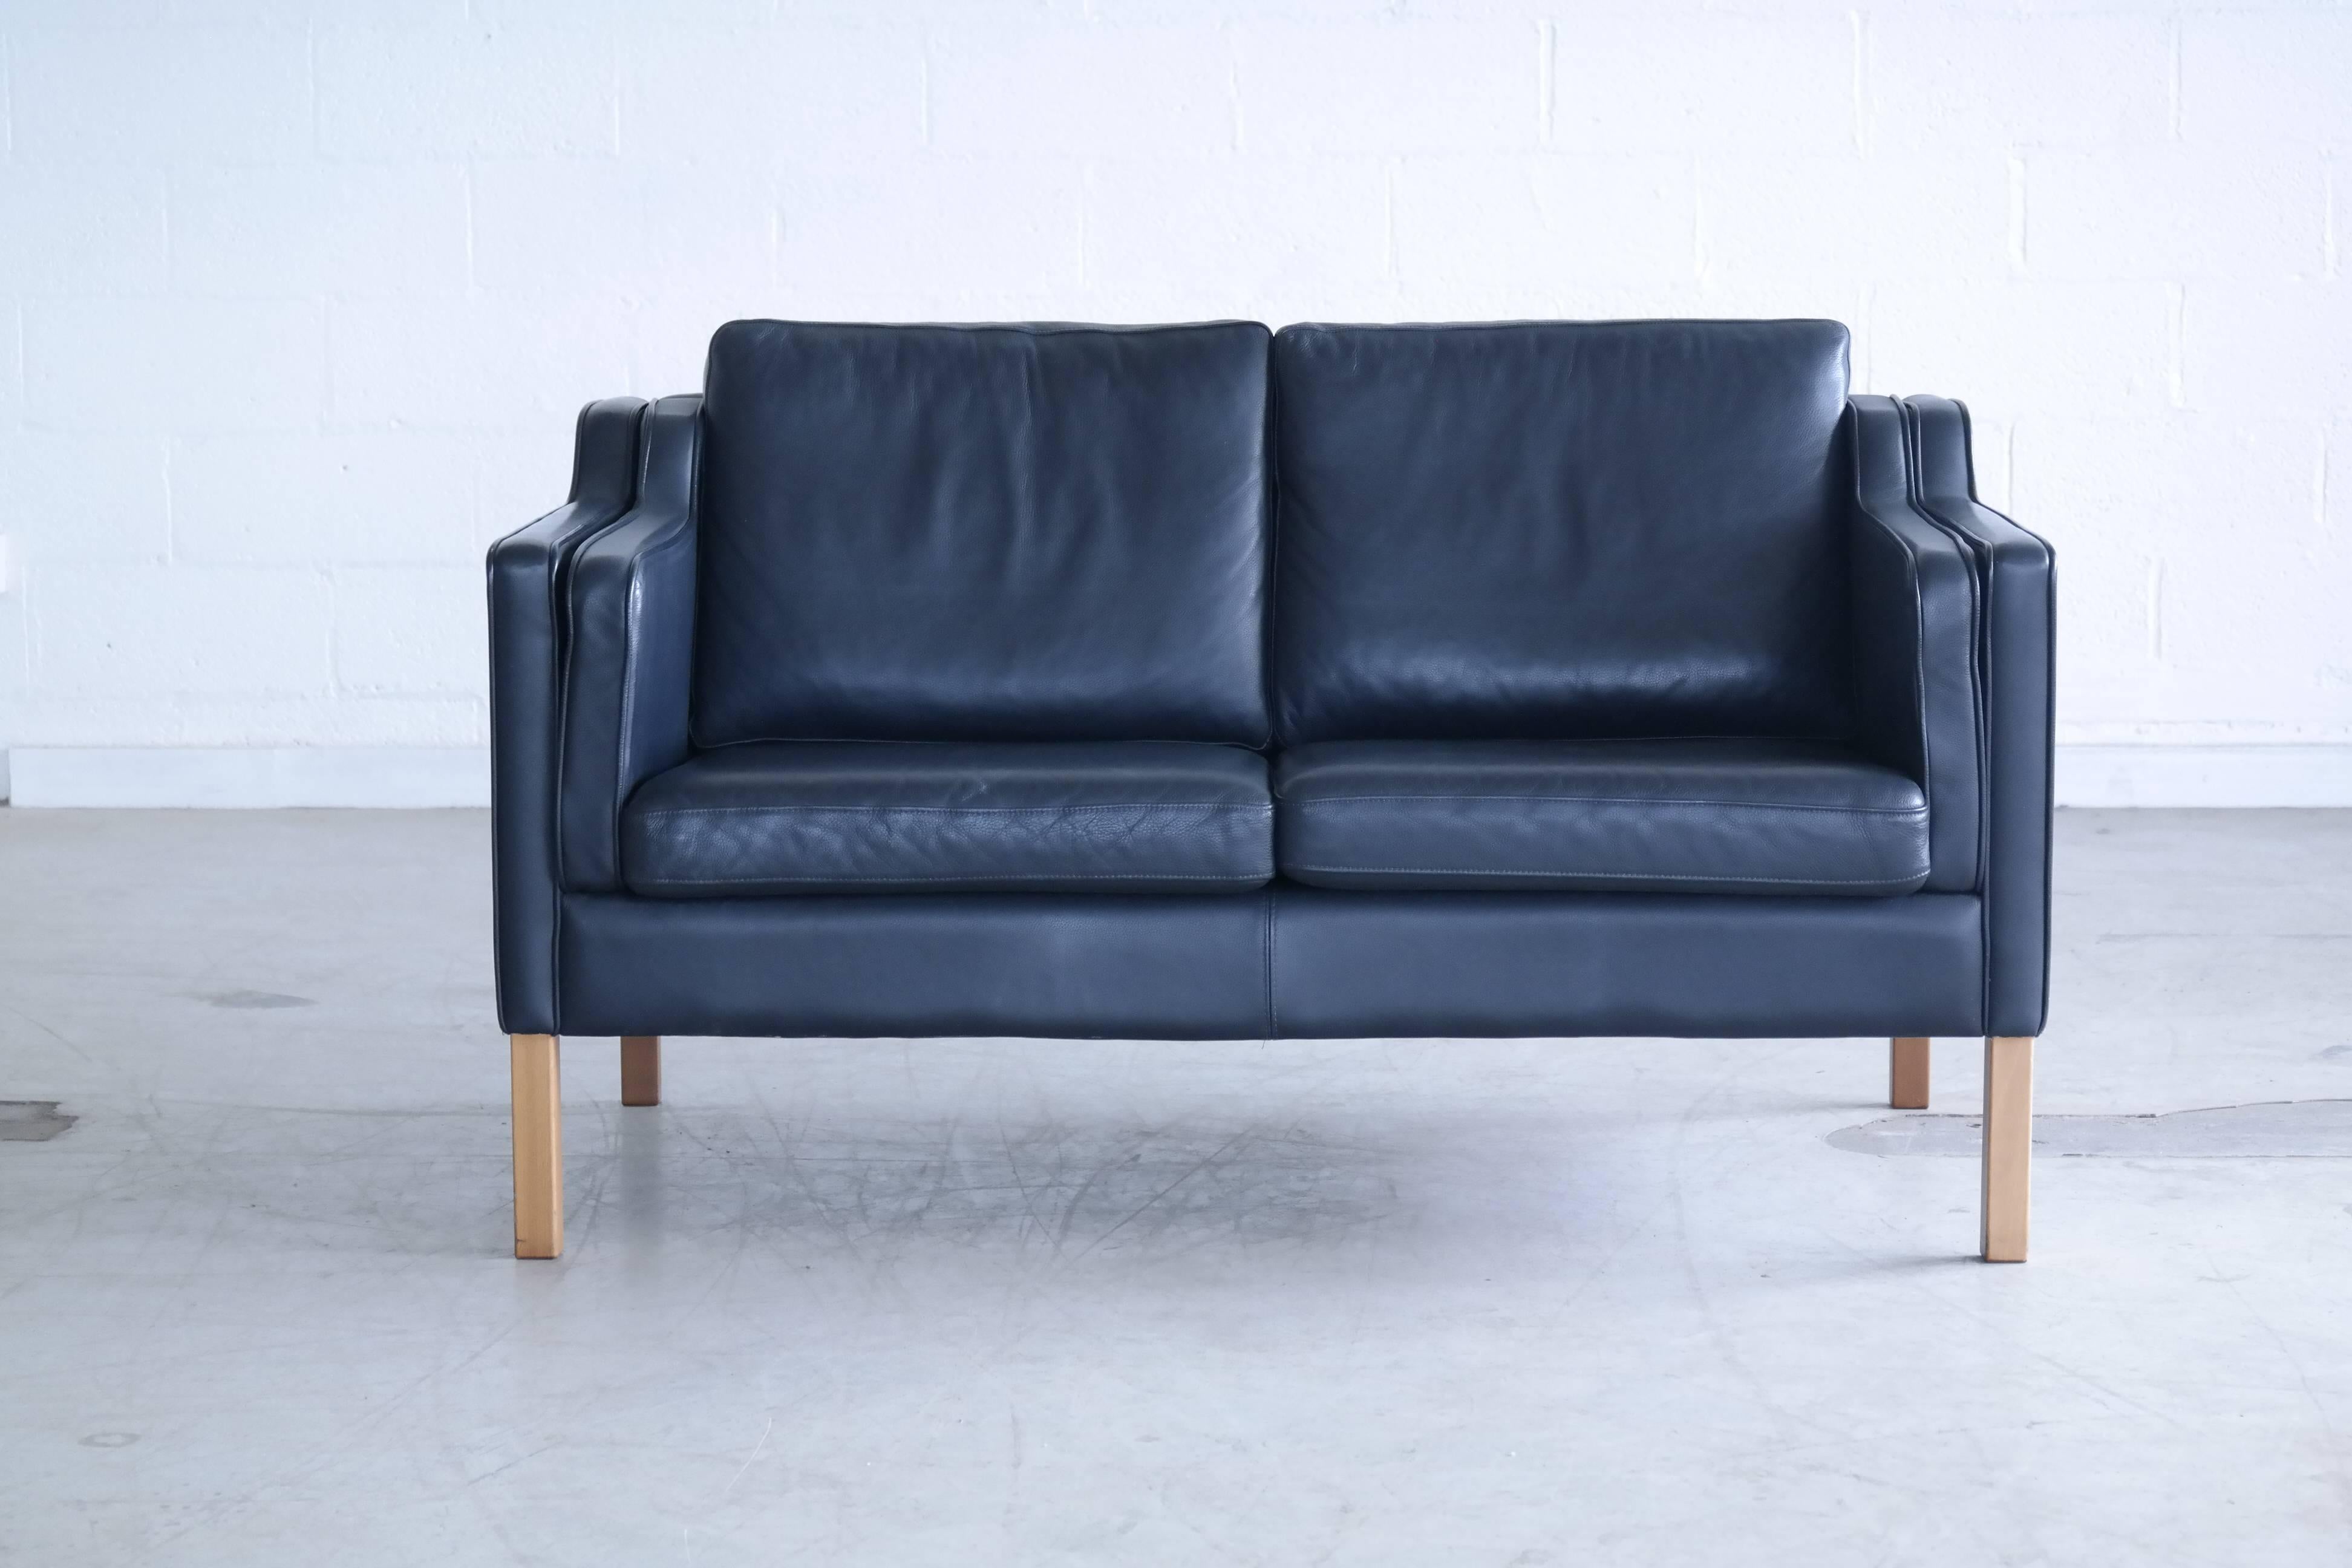 Very elegant and comfortable Classic Børge Mogensen style sofa model 2212 in Dark navy blue leather by Stouby Polsterfabrik of Denmark. High quality leather over a beech wood frame and legs. Cushions are top filled with down. Nice worn-in quality